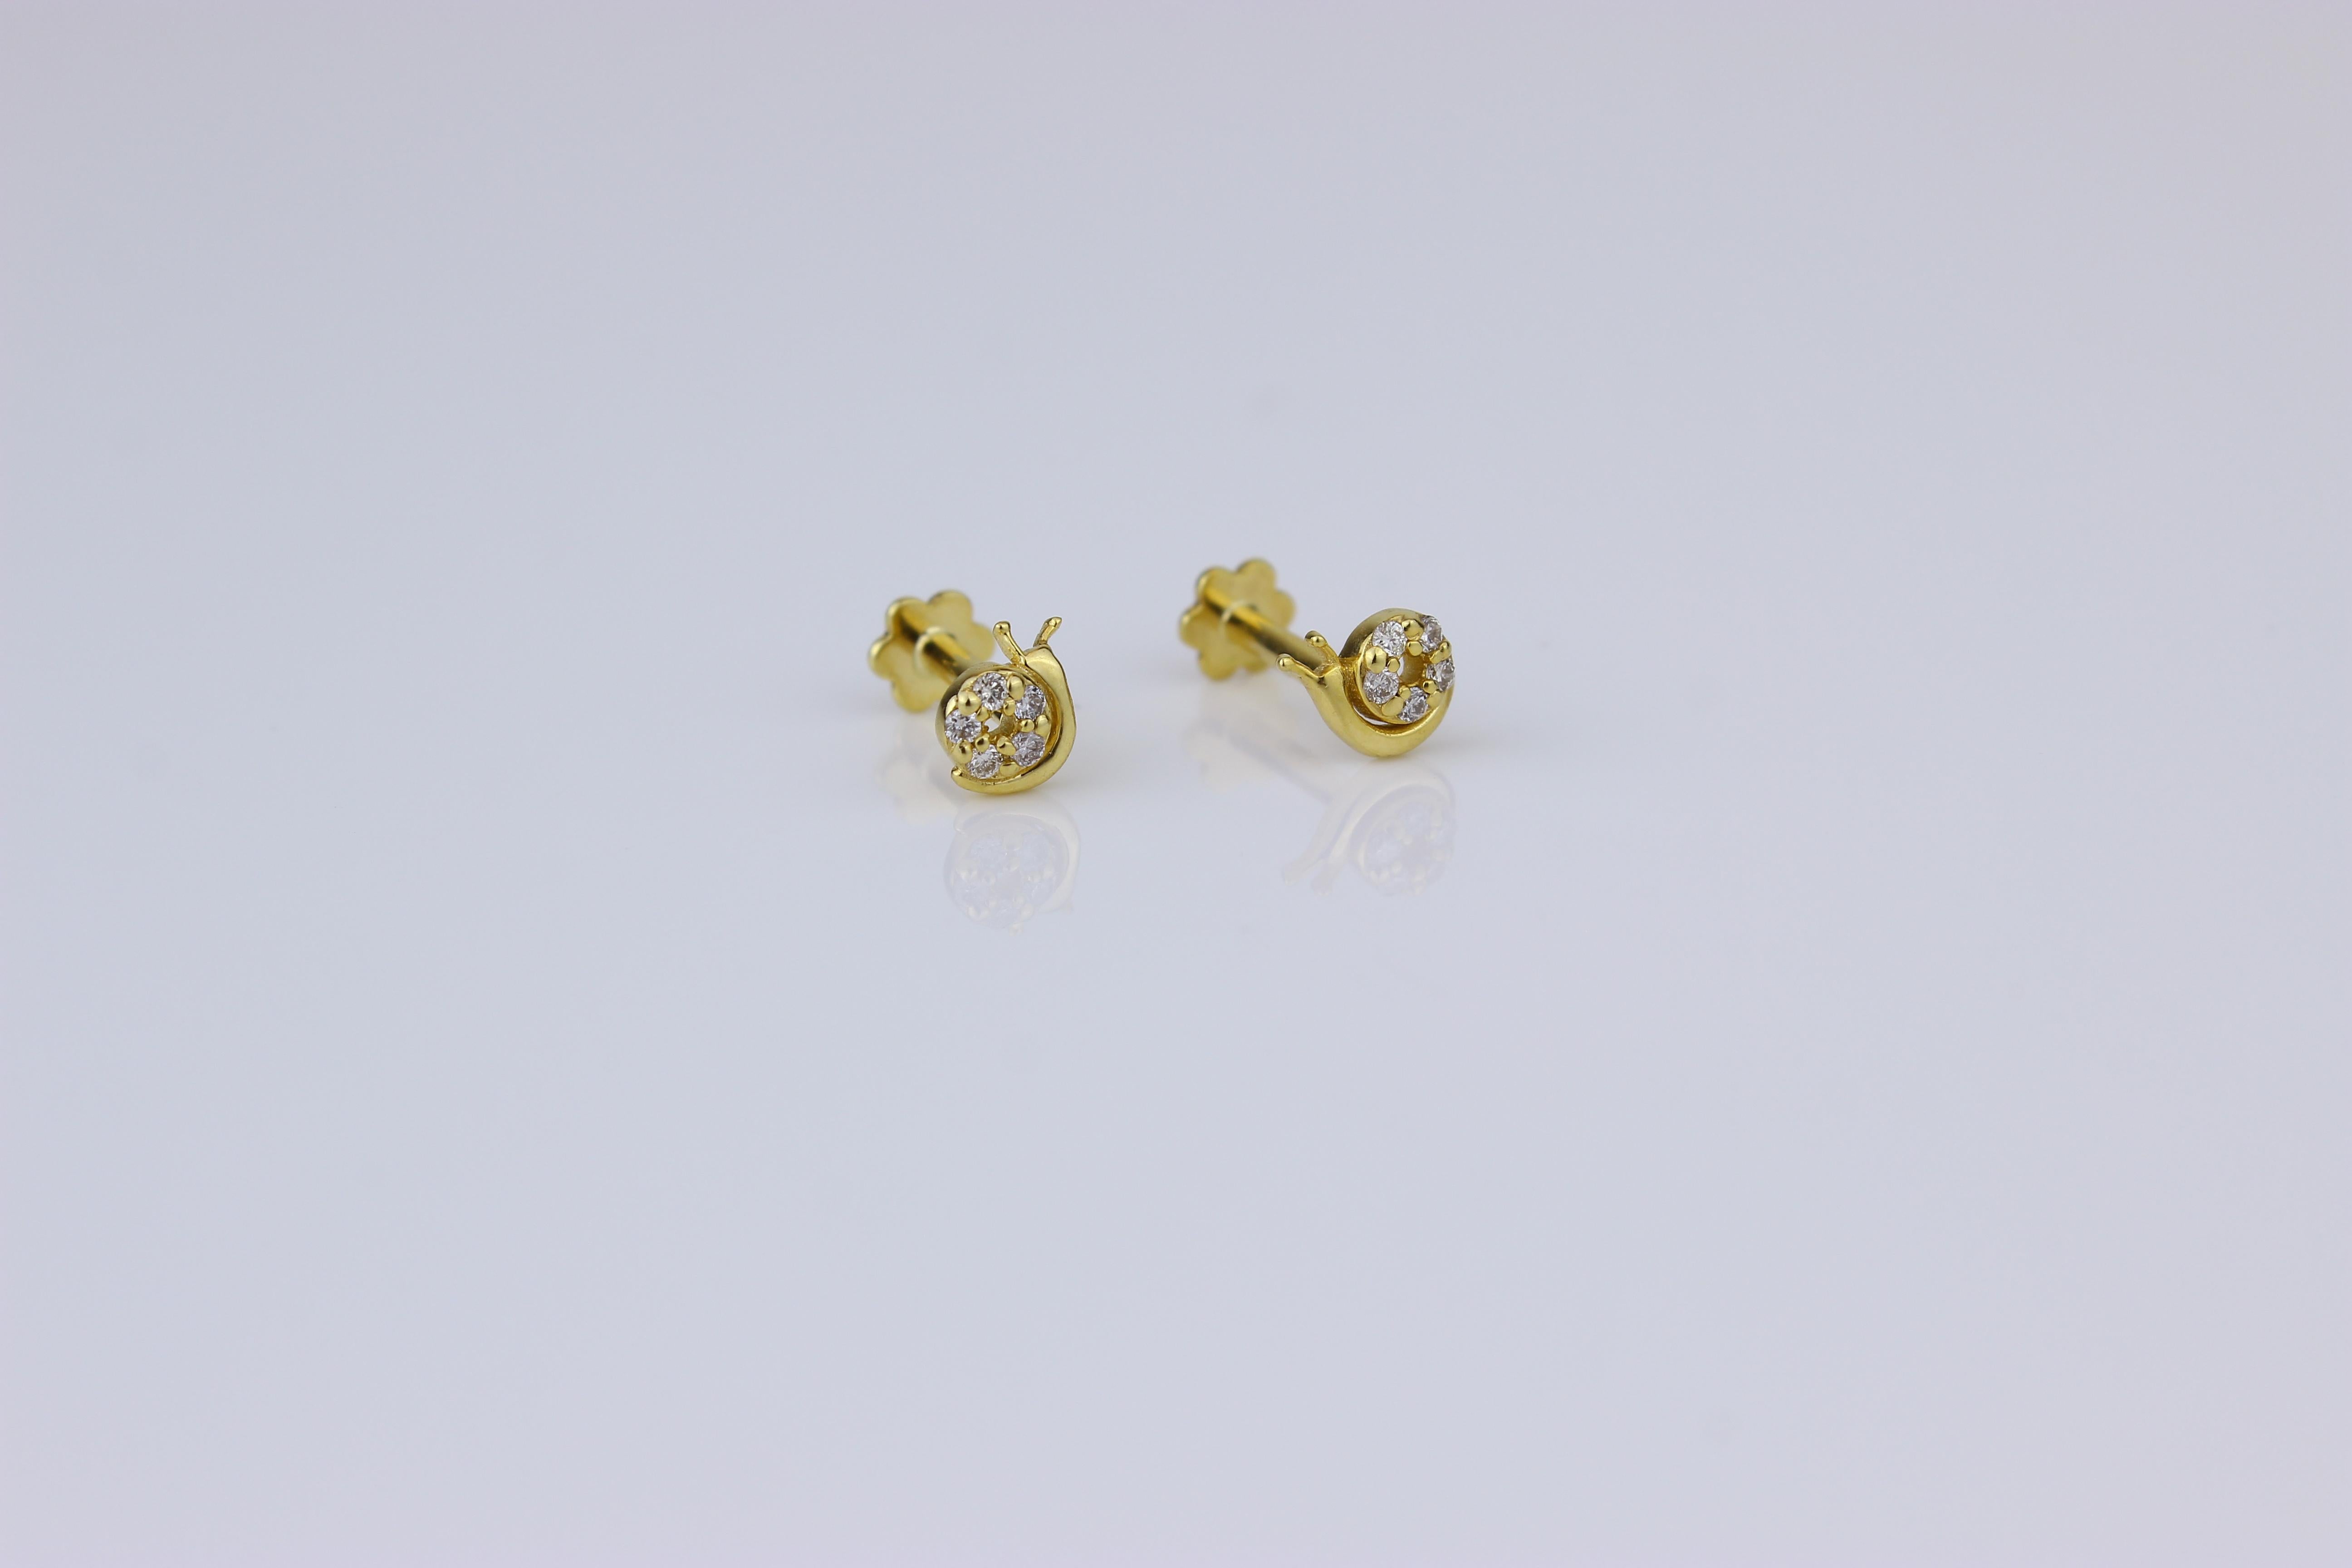 Charming SNAIL Diamond Earrings designed for Girls (Kids/Toddlers) in elegant 18K Solid Gold. These whimsical earrings feature adorable snail motifs with delicate diamond accents, bringing a touch of playful elegance to your child's style, while